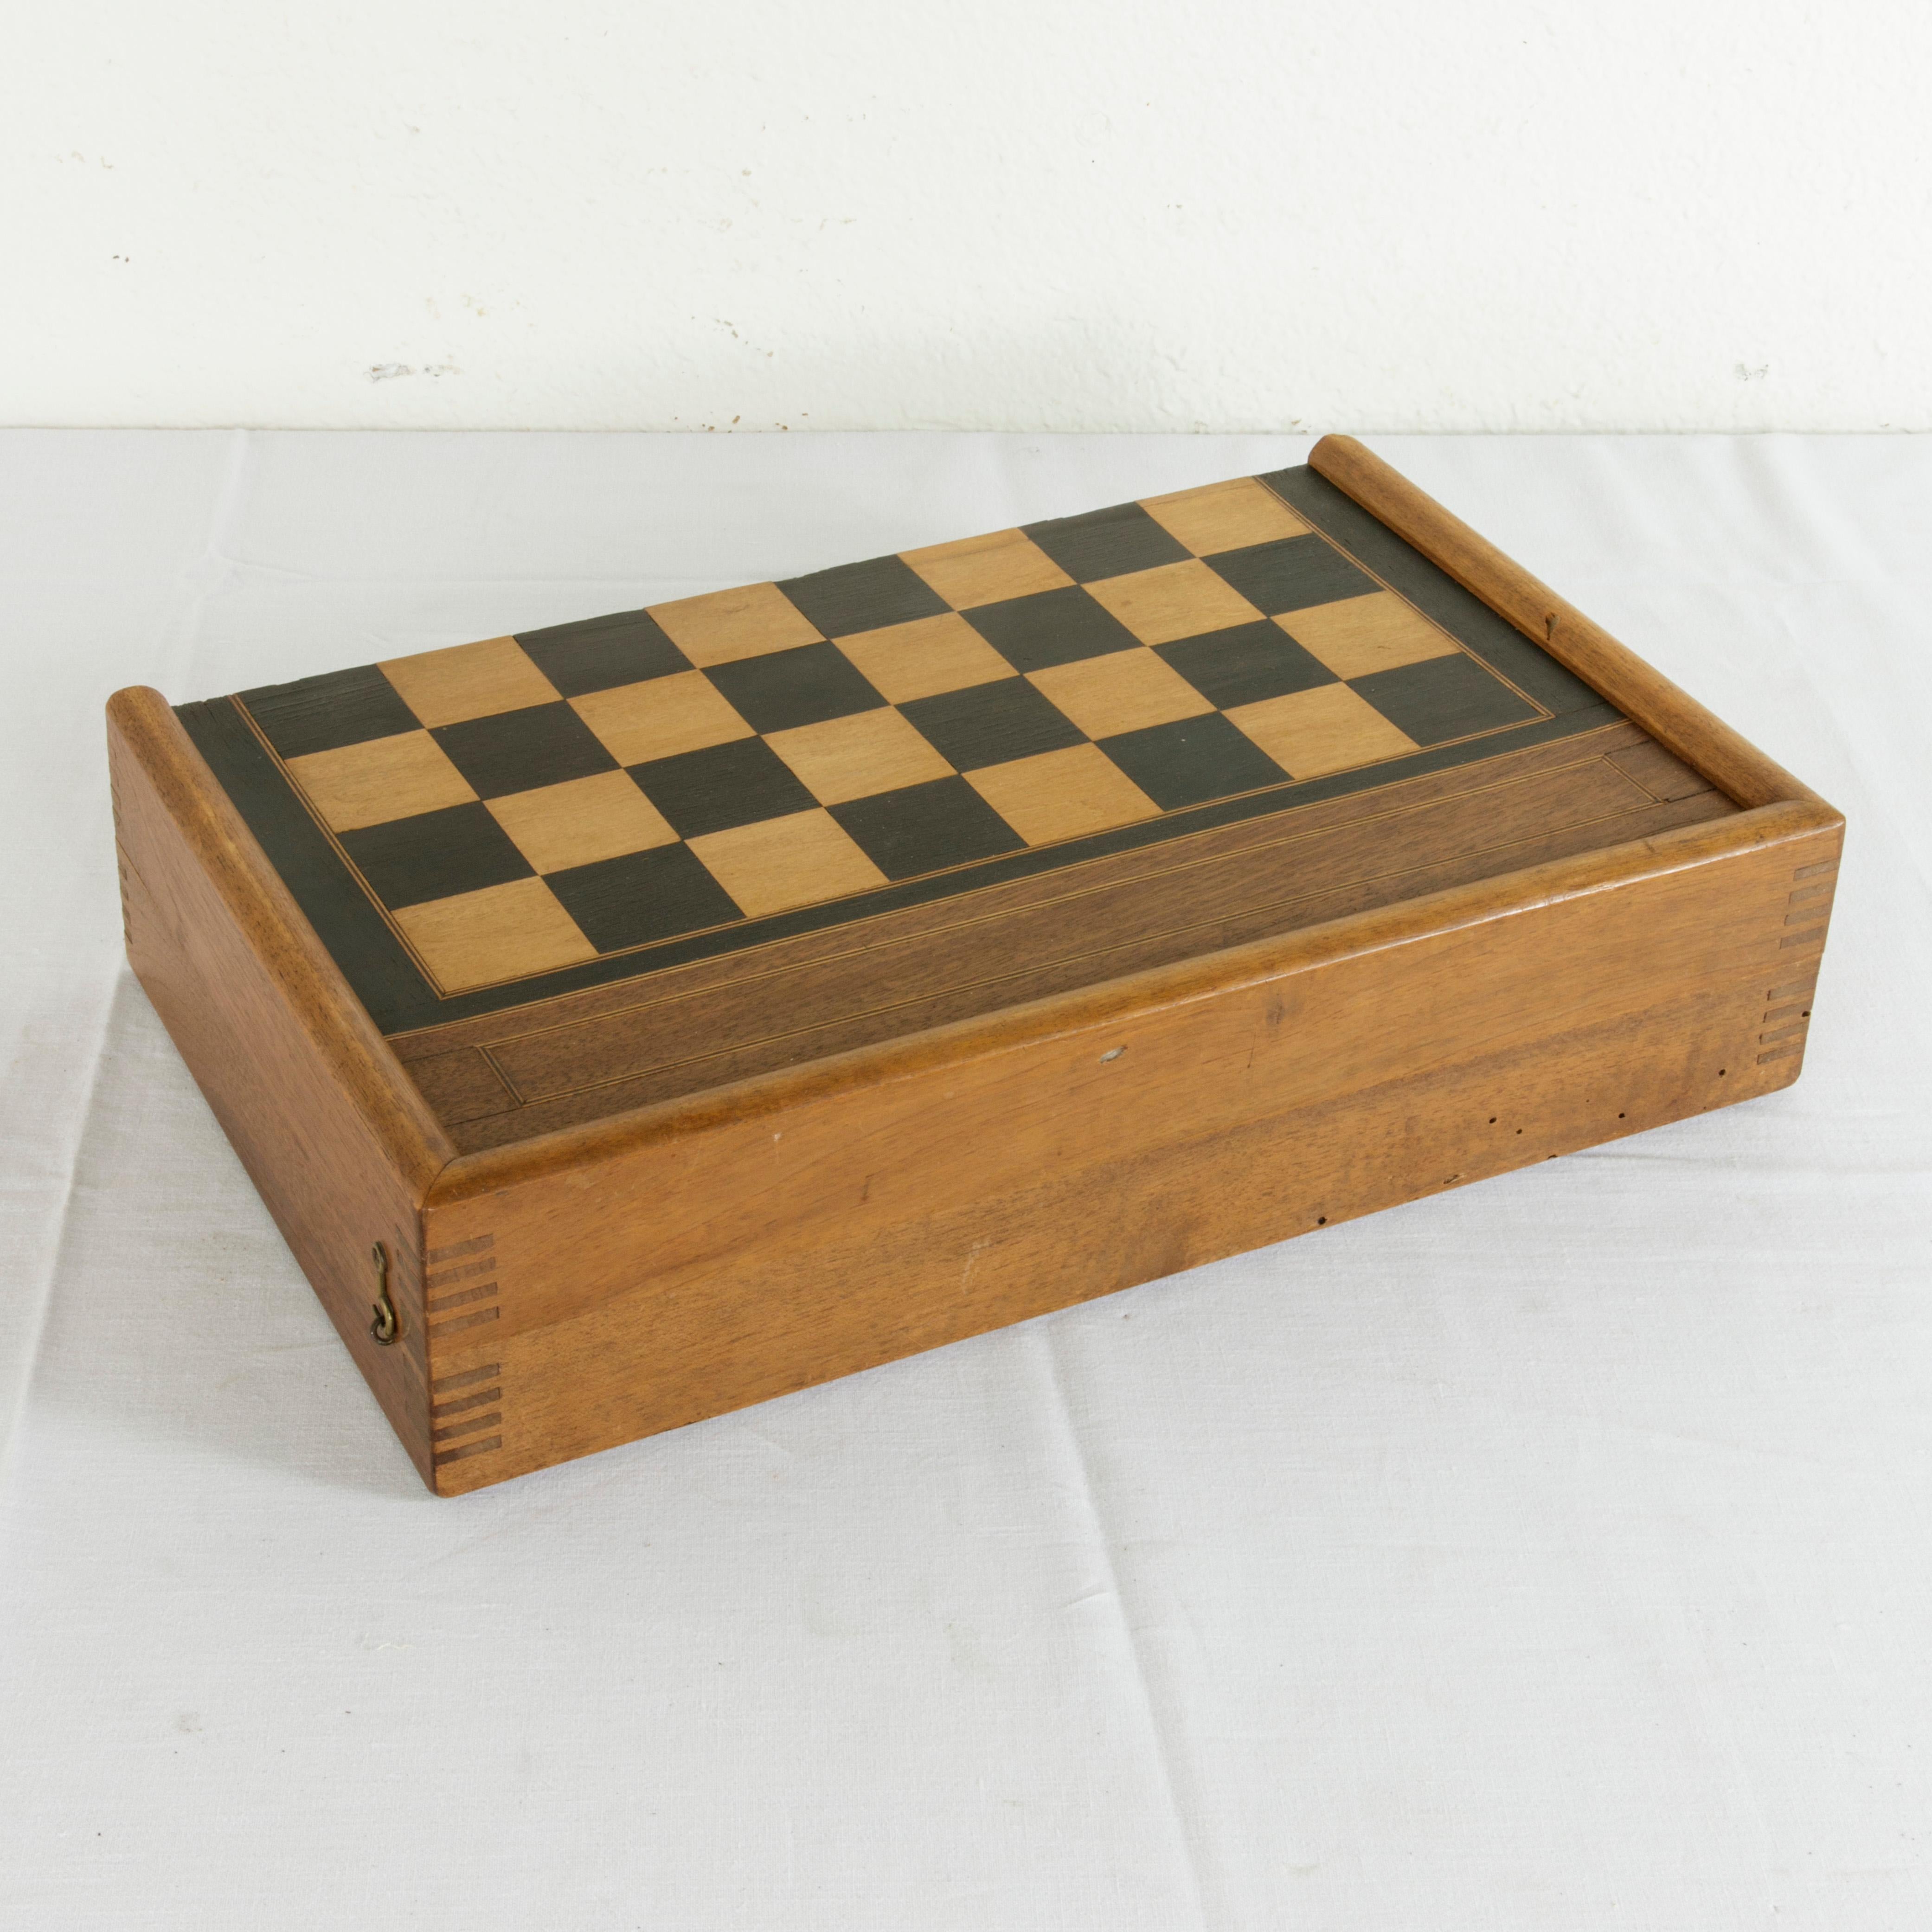 This French walnut marquetry folding game box from the turn of the 20th century is for both checkers and backgammon. It is finely constructed with dovetailed corners, inset hinges, and a locking brass hook on each side. The checker board side of the